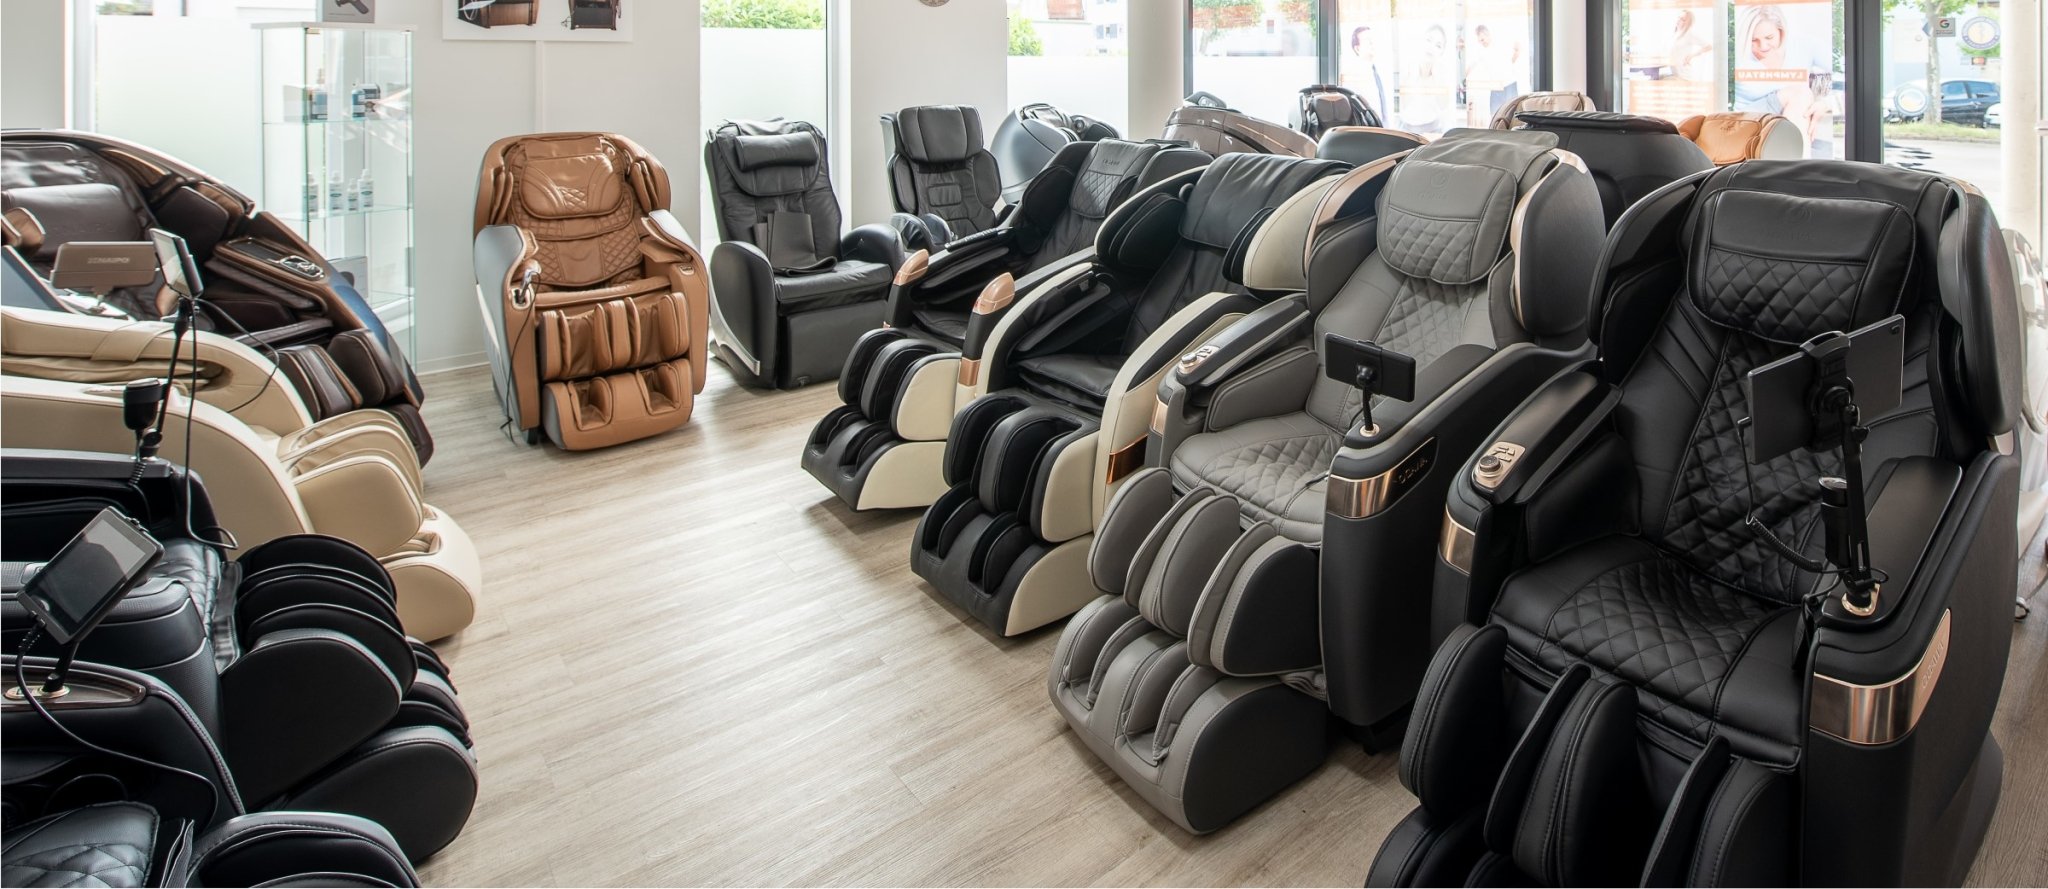 Massage Chair World exhibition and showroom with expert advice